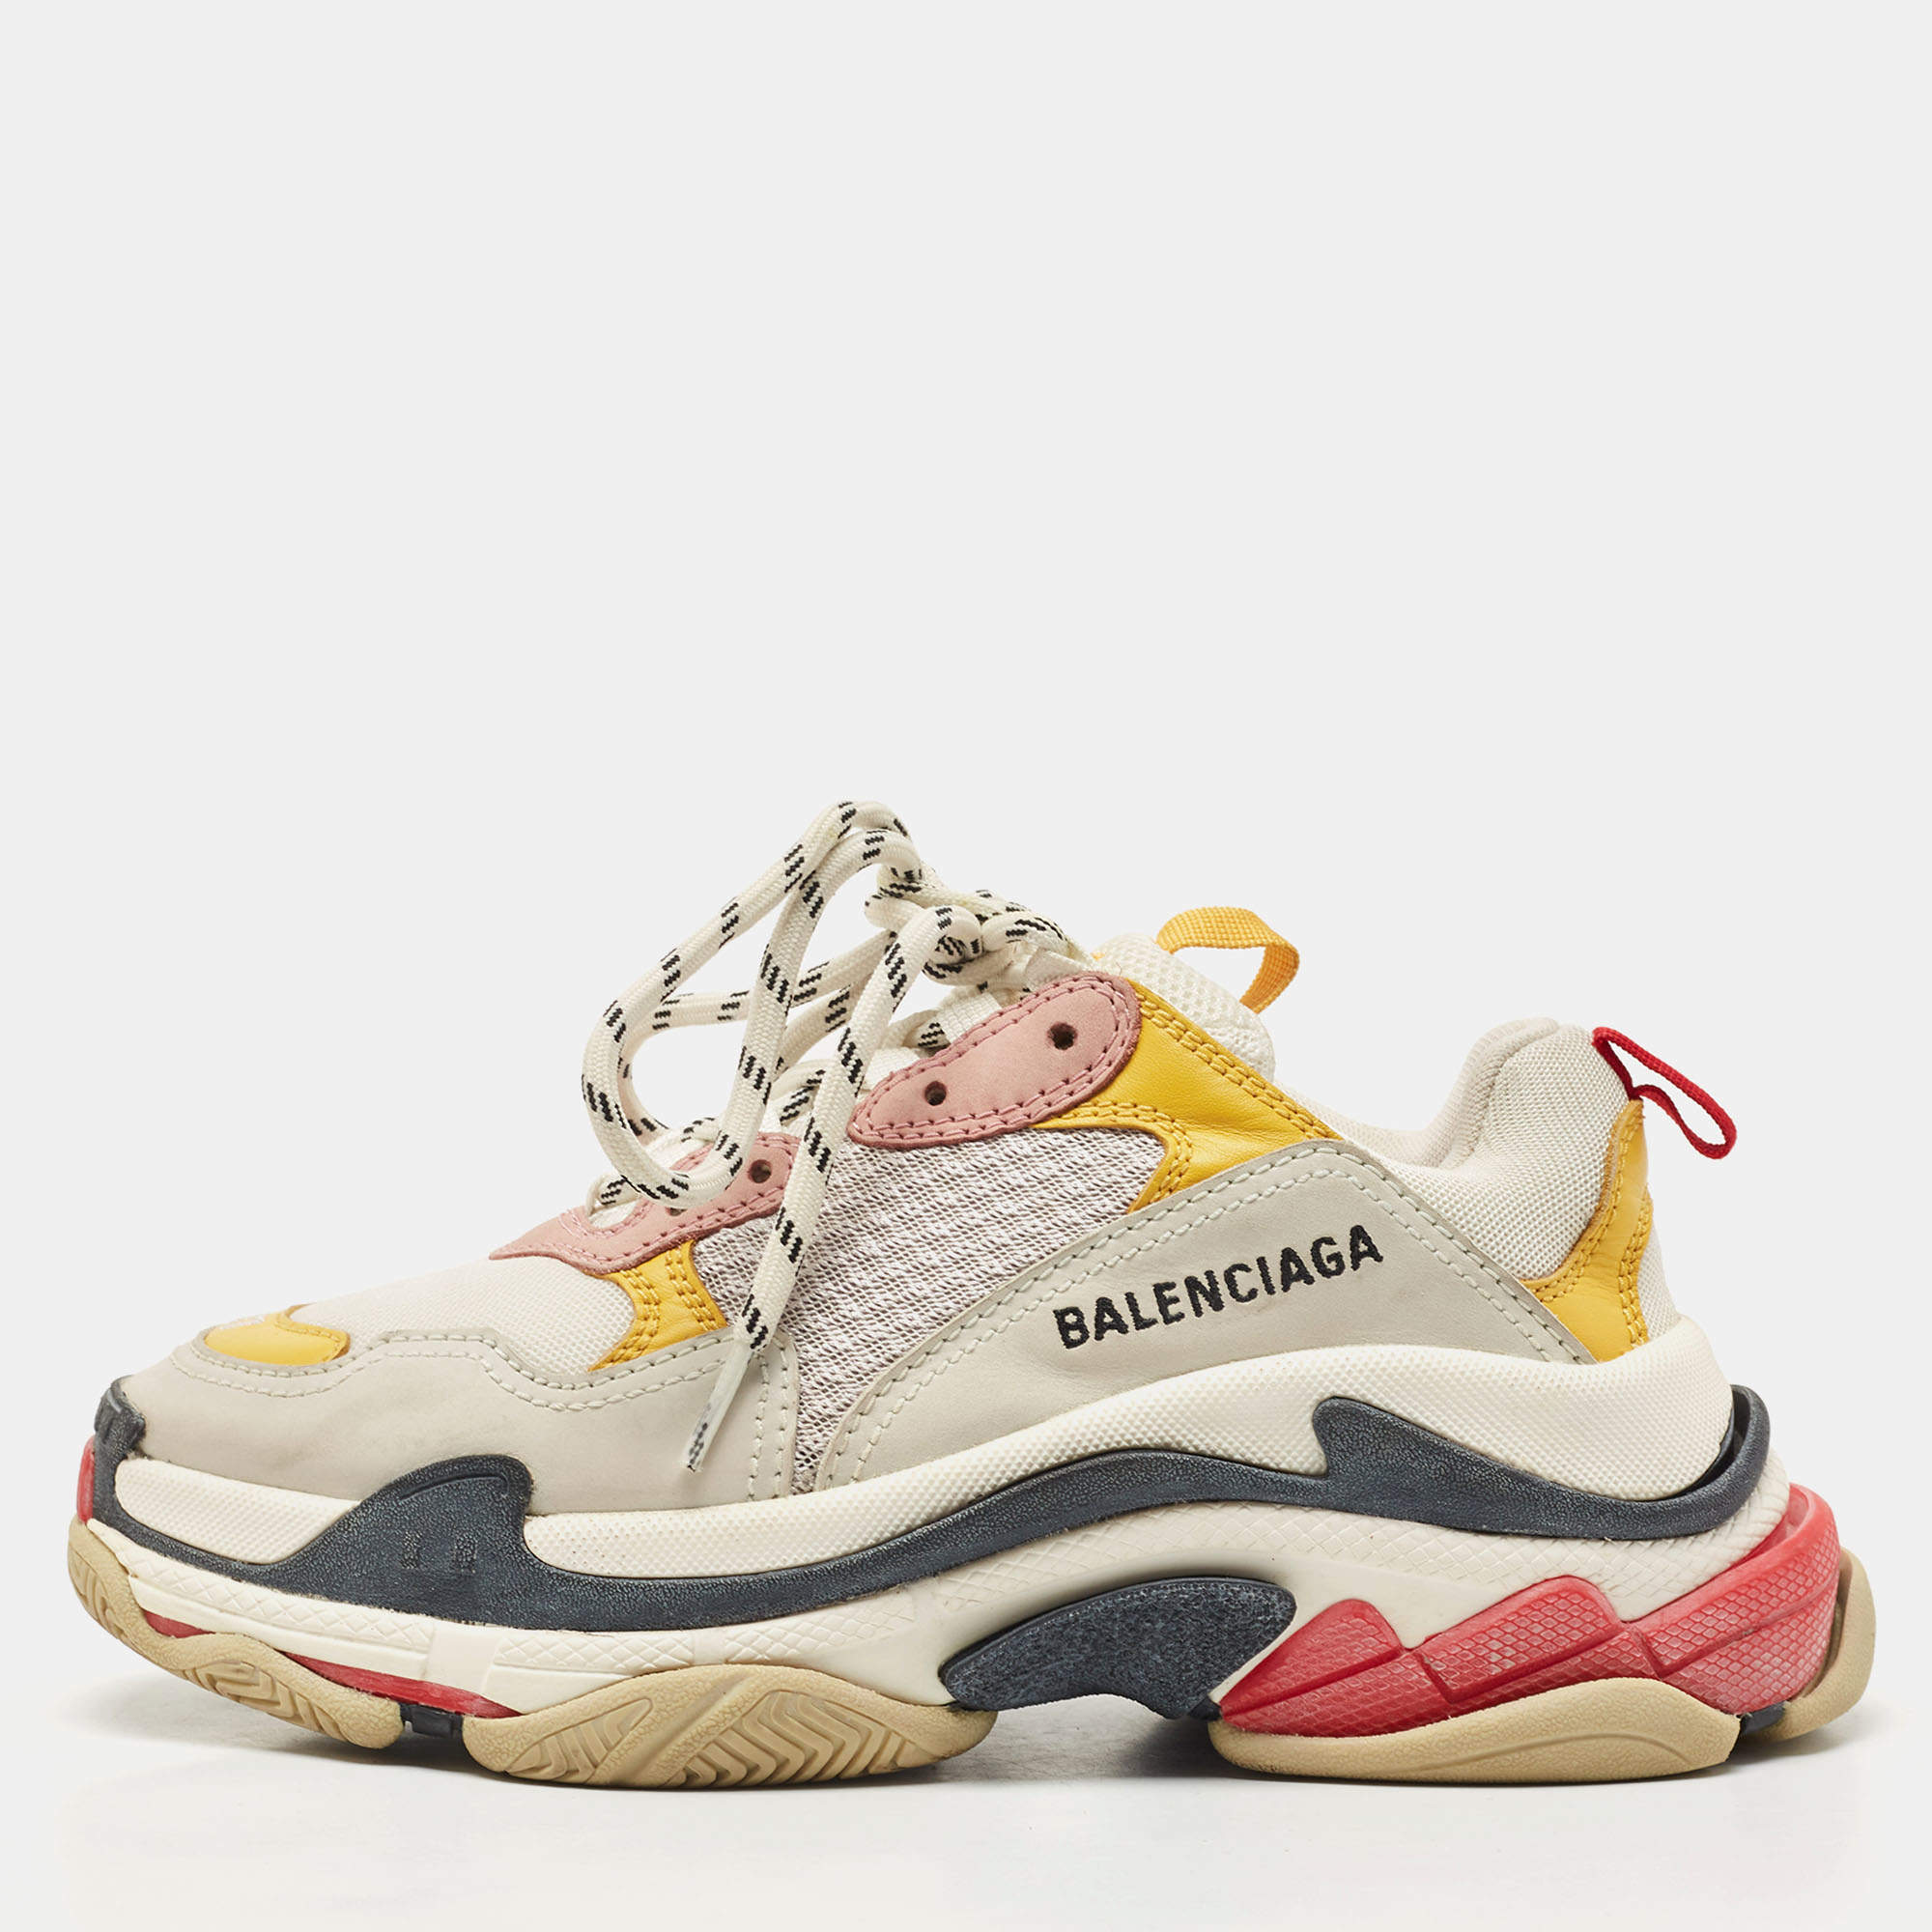 Balenciaga Tri Color Leather and Mesh Triple S Sneakers Size 37 ...